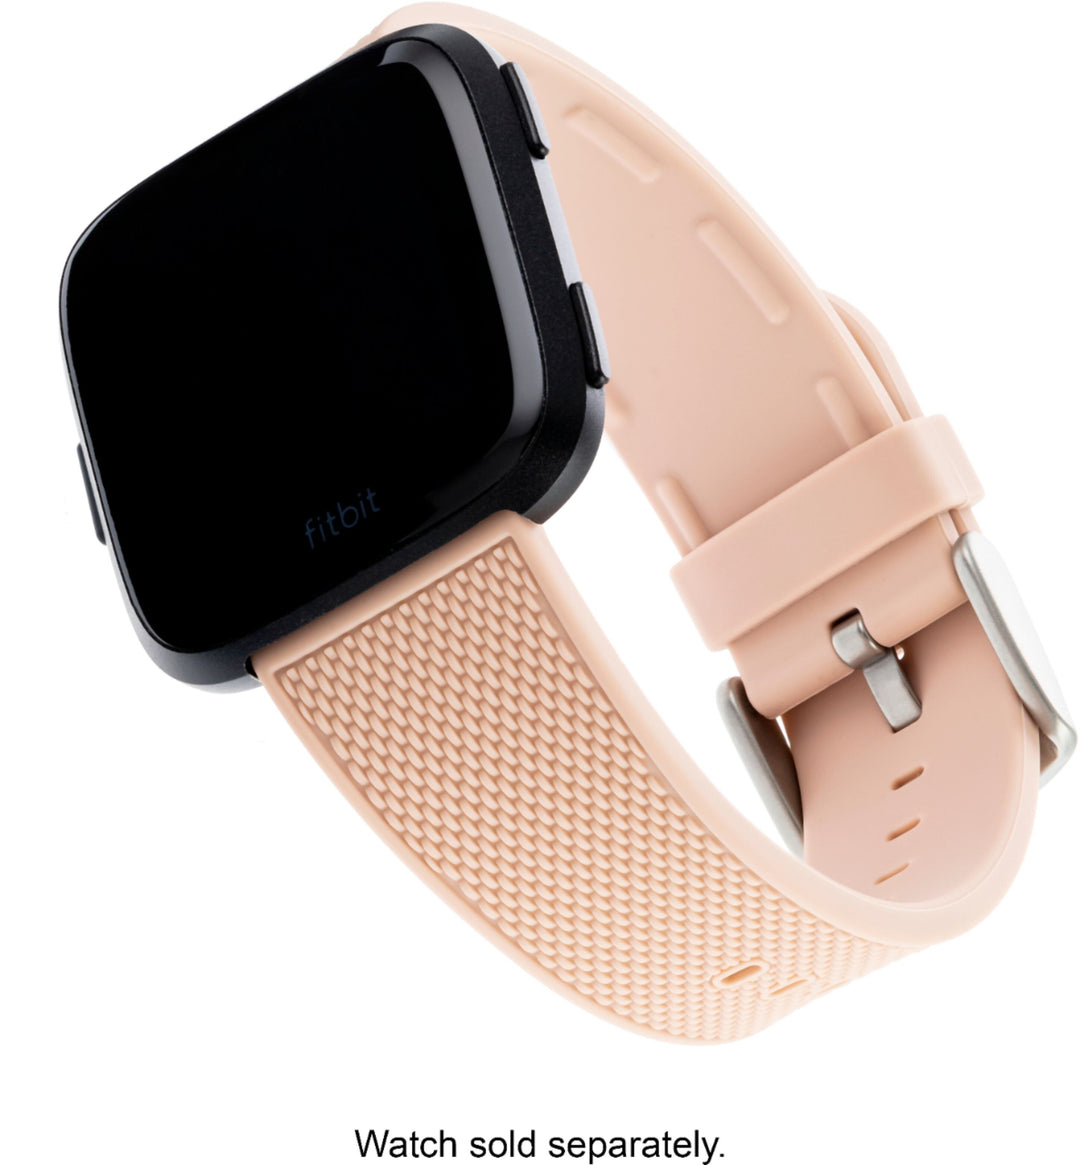 WITHit - Band Kit for Fitbit Versa and Versa 2 (3-Pack) - Navy/Light Gray/Blush Pink_11